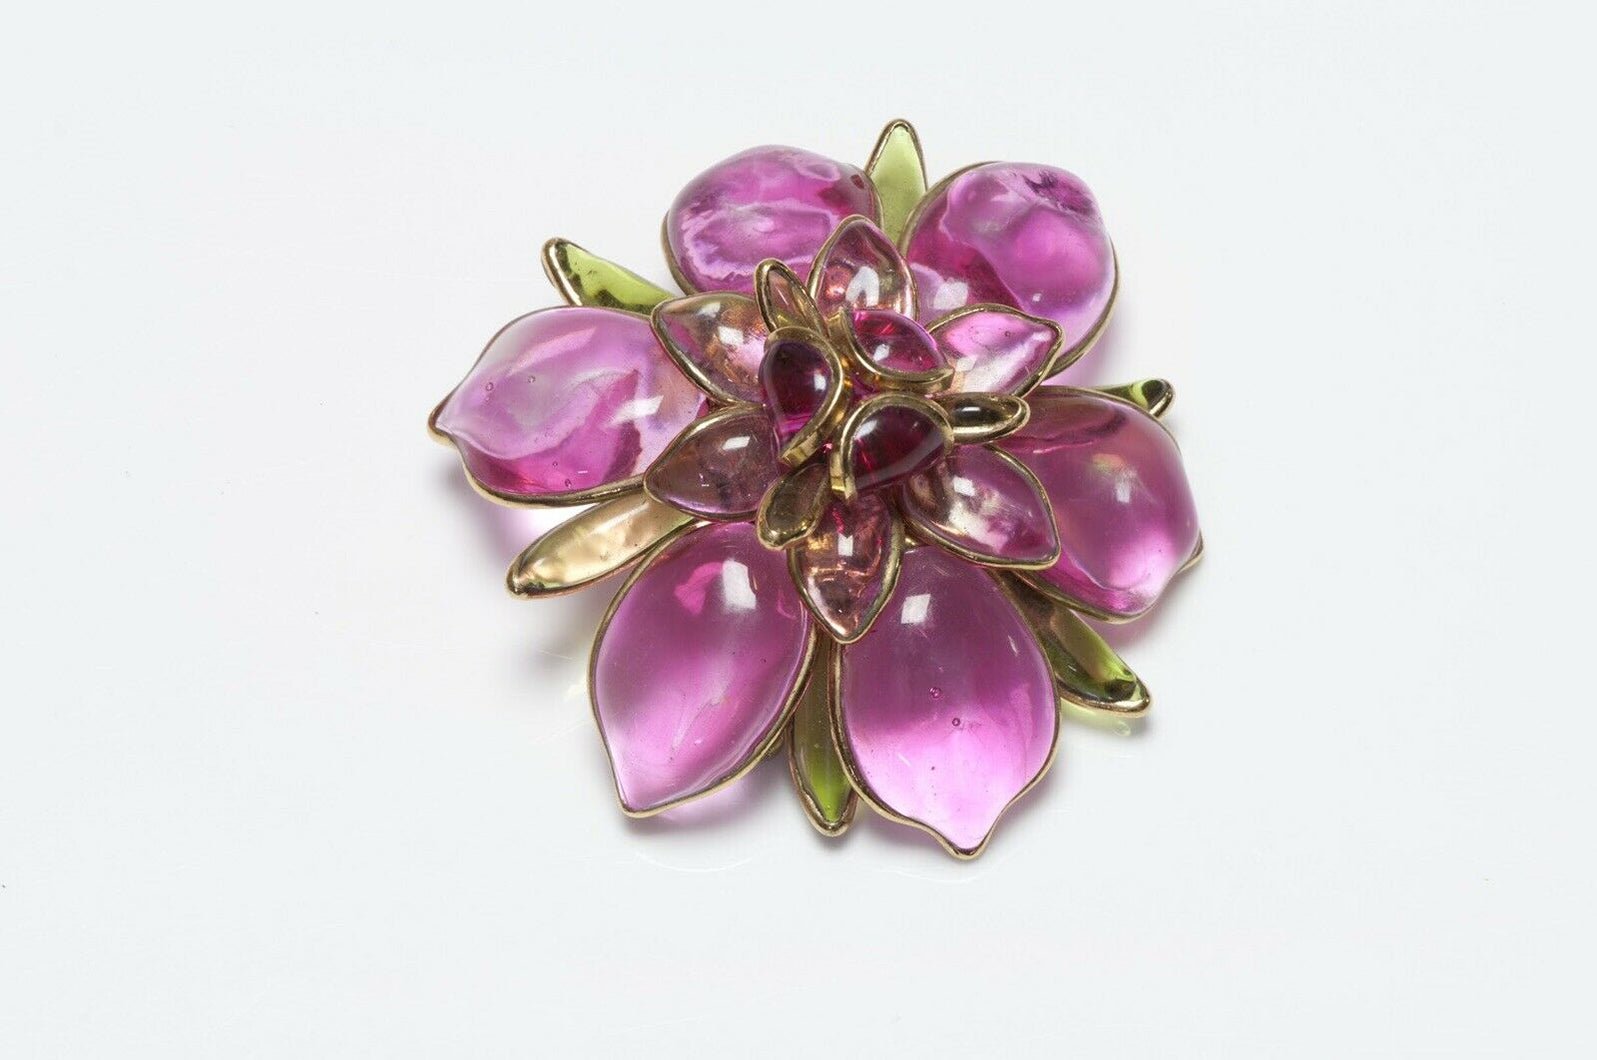 CHANEL Maison Gripoix 1950’s Pink Glass Camellia Flower Brooch - DSF Antique Jewelry